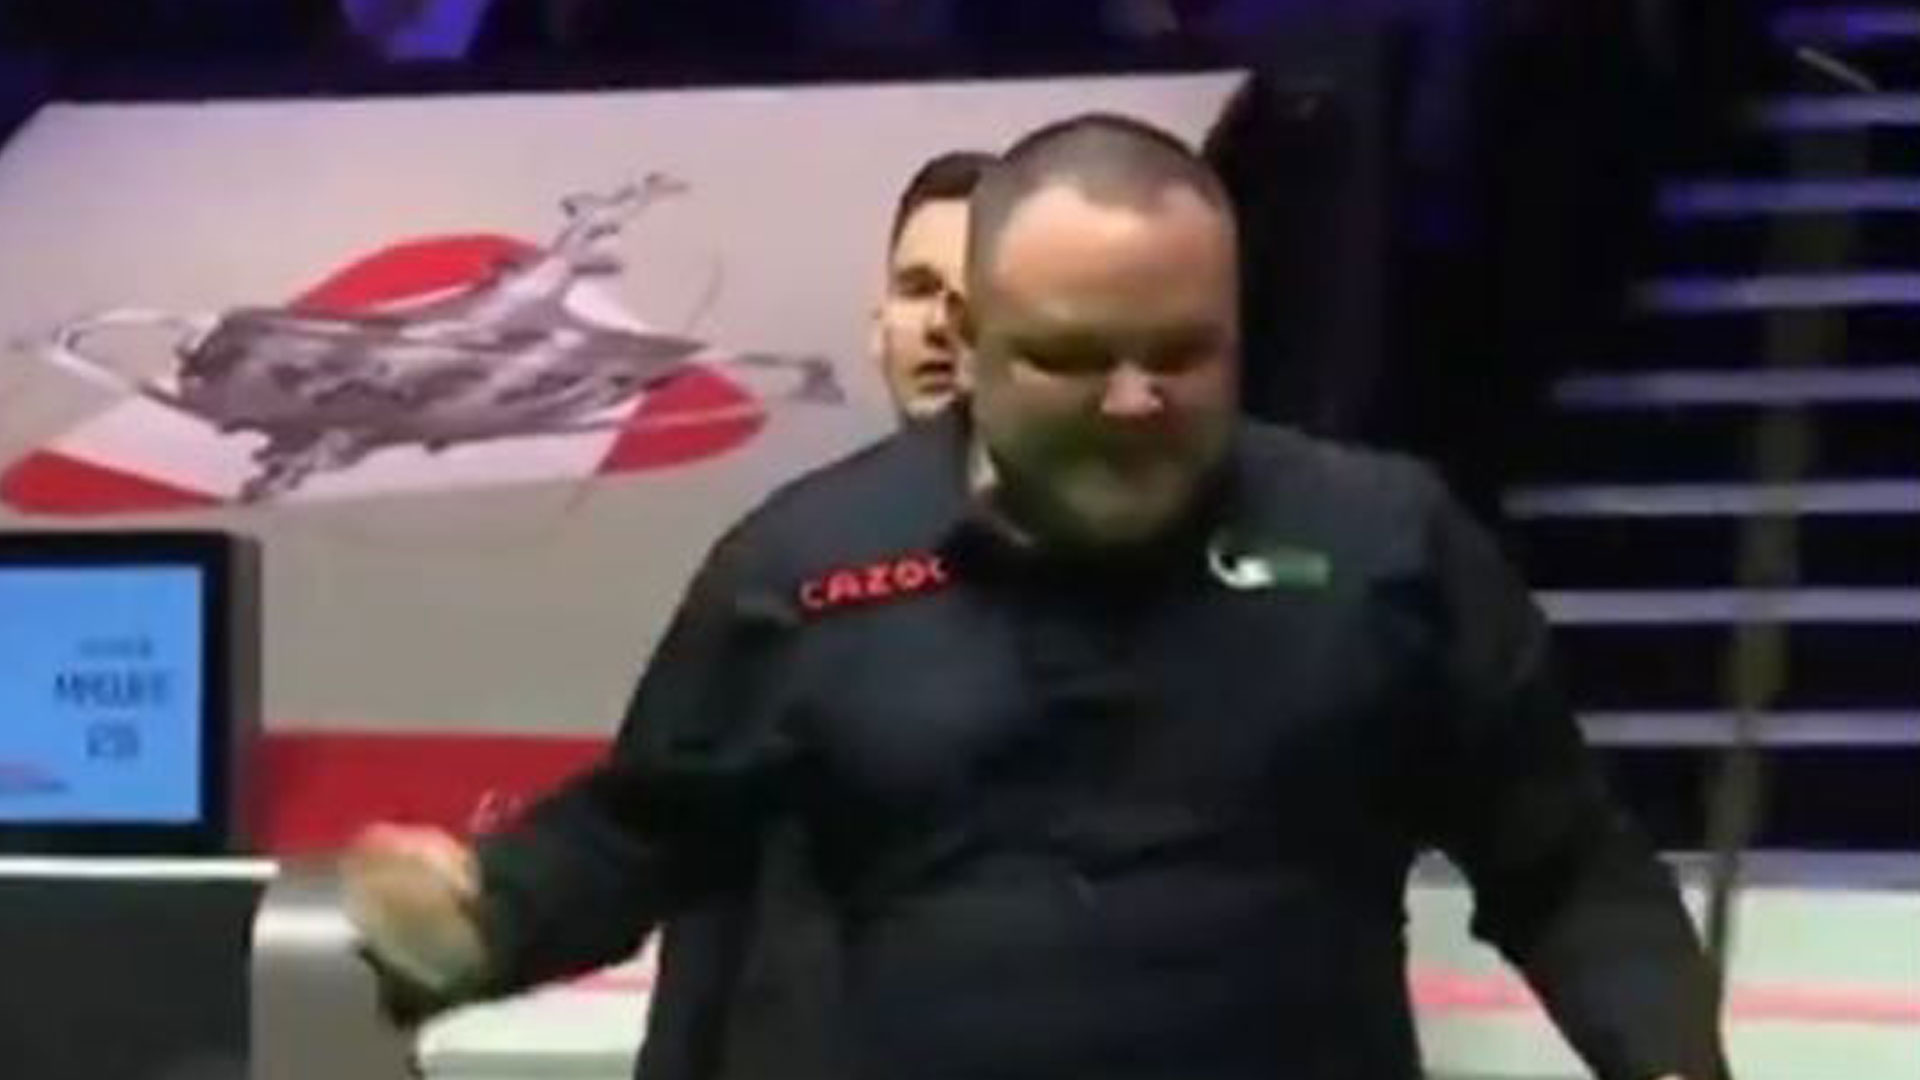 Stephen Maguire defends table-punching gesture at World Snooker Championship amid rivalry that started 20 YEARS AGO [Video]